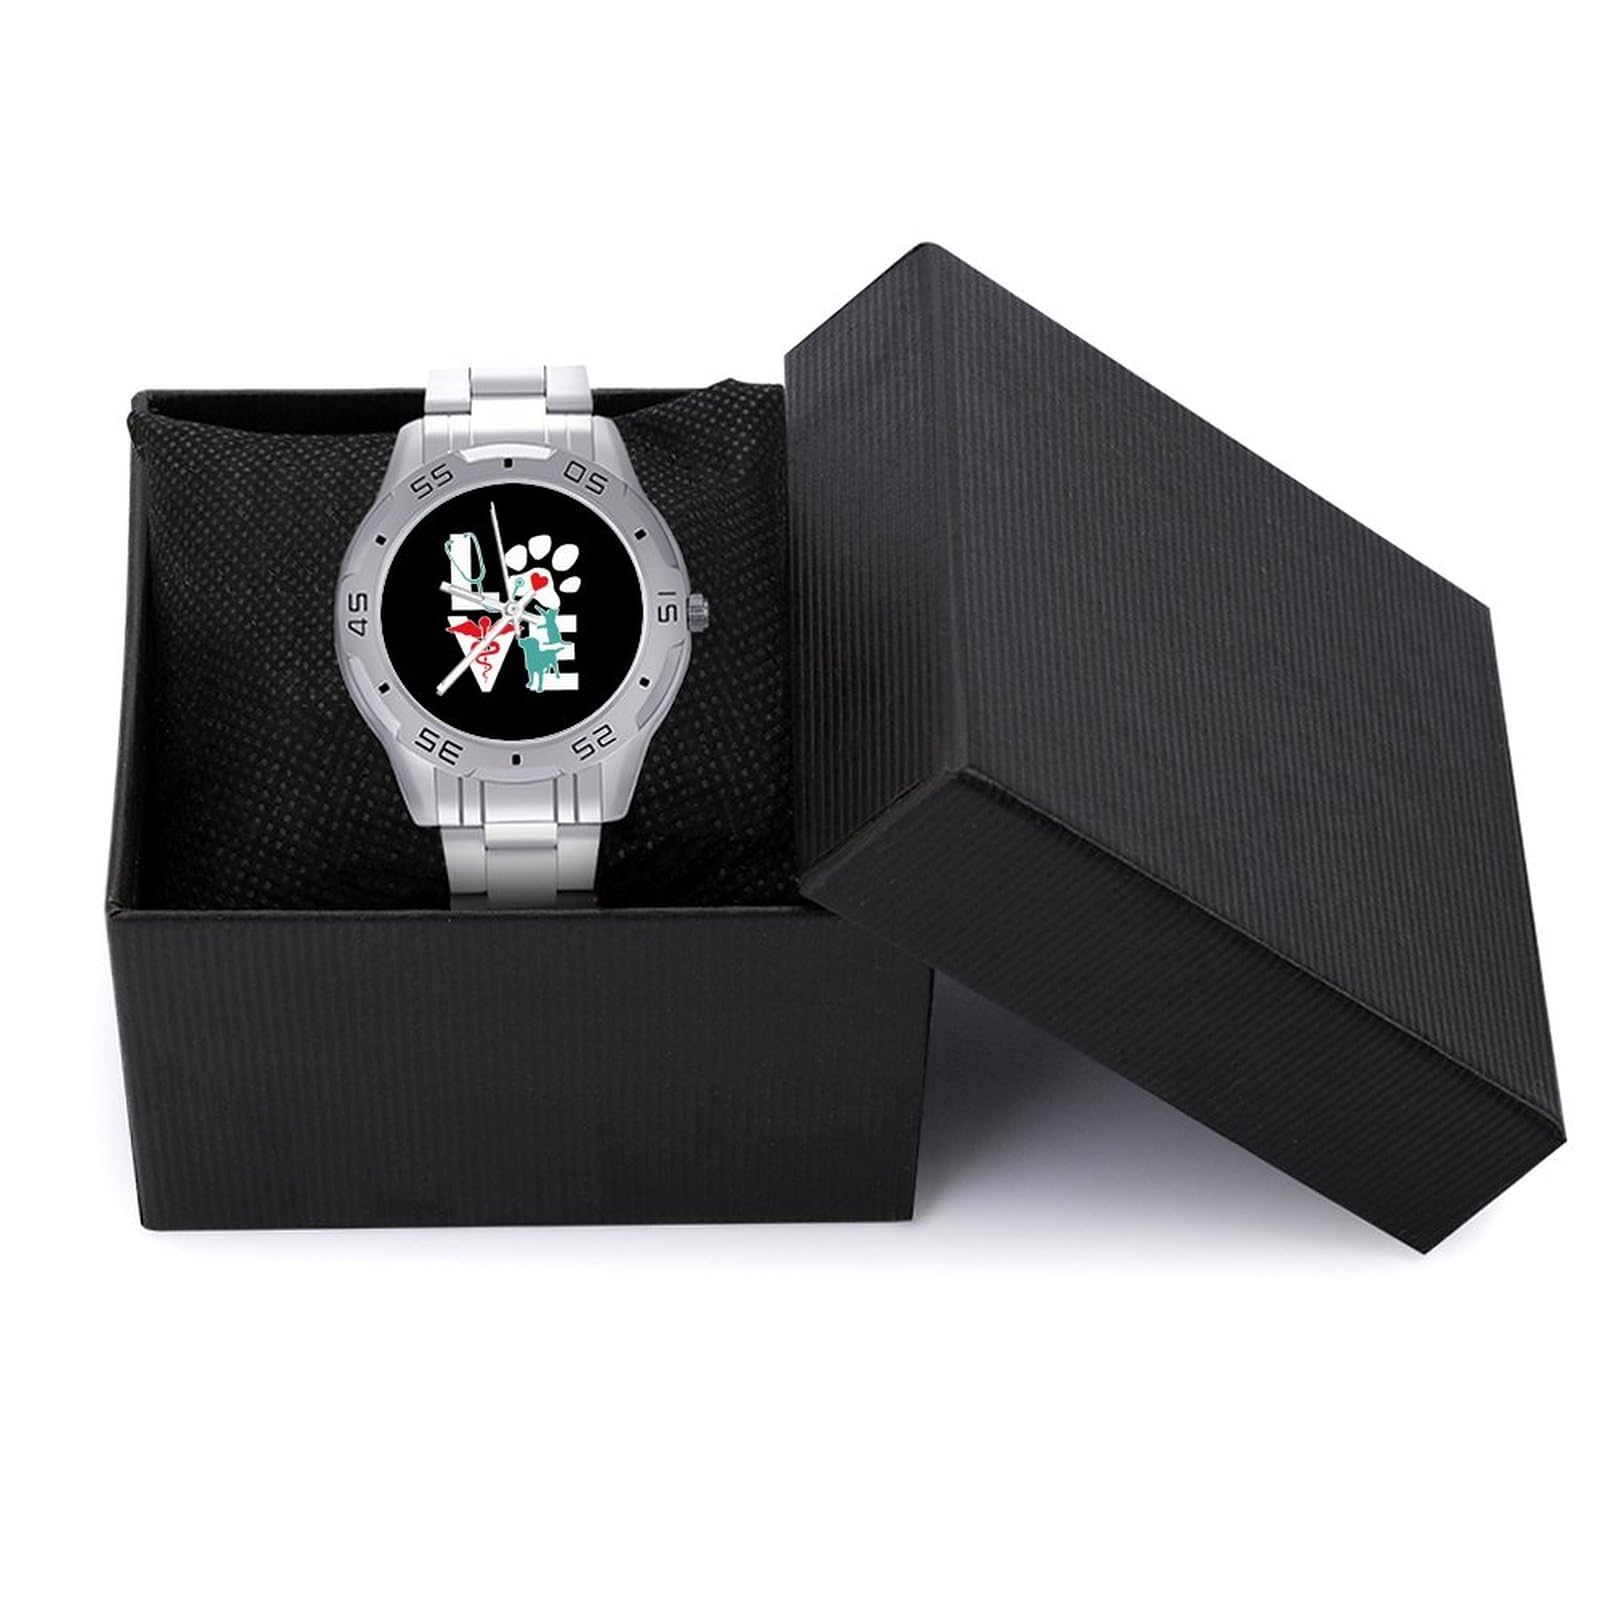 Veterinarian Love Cat and Dog Veterinary Stainless Steel Band Business Watch Dress Wrist Unique Luxury Work Casual Waterproof Watches